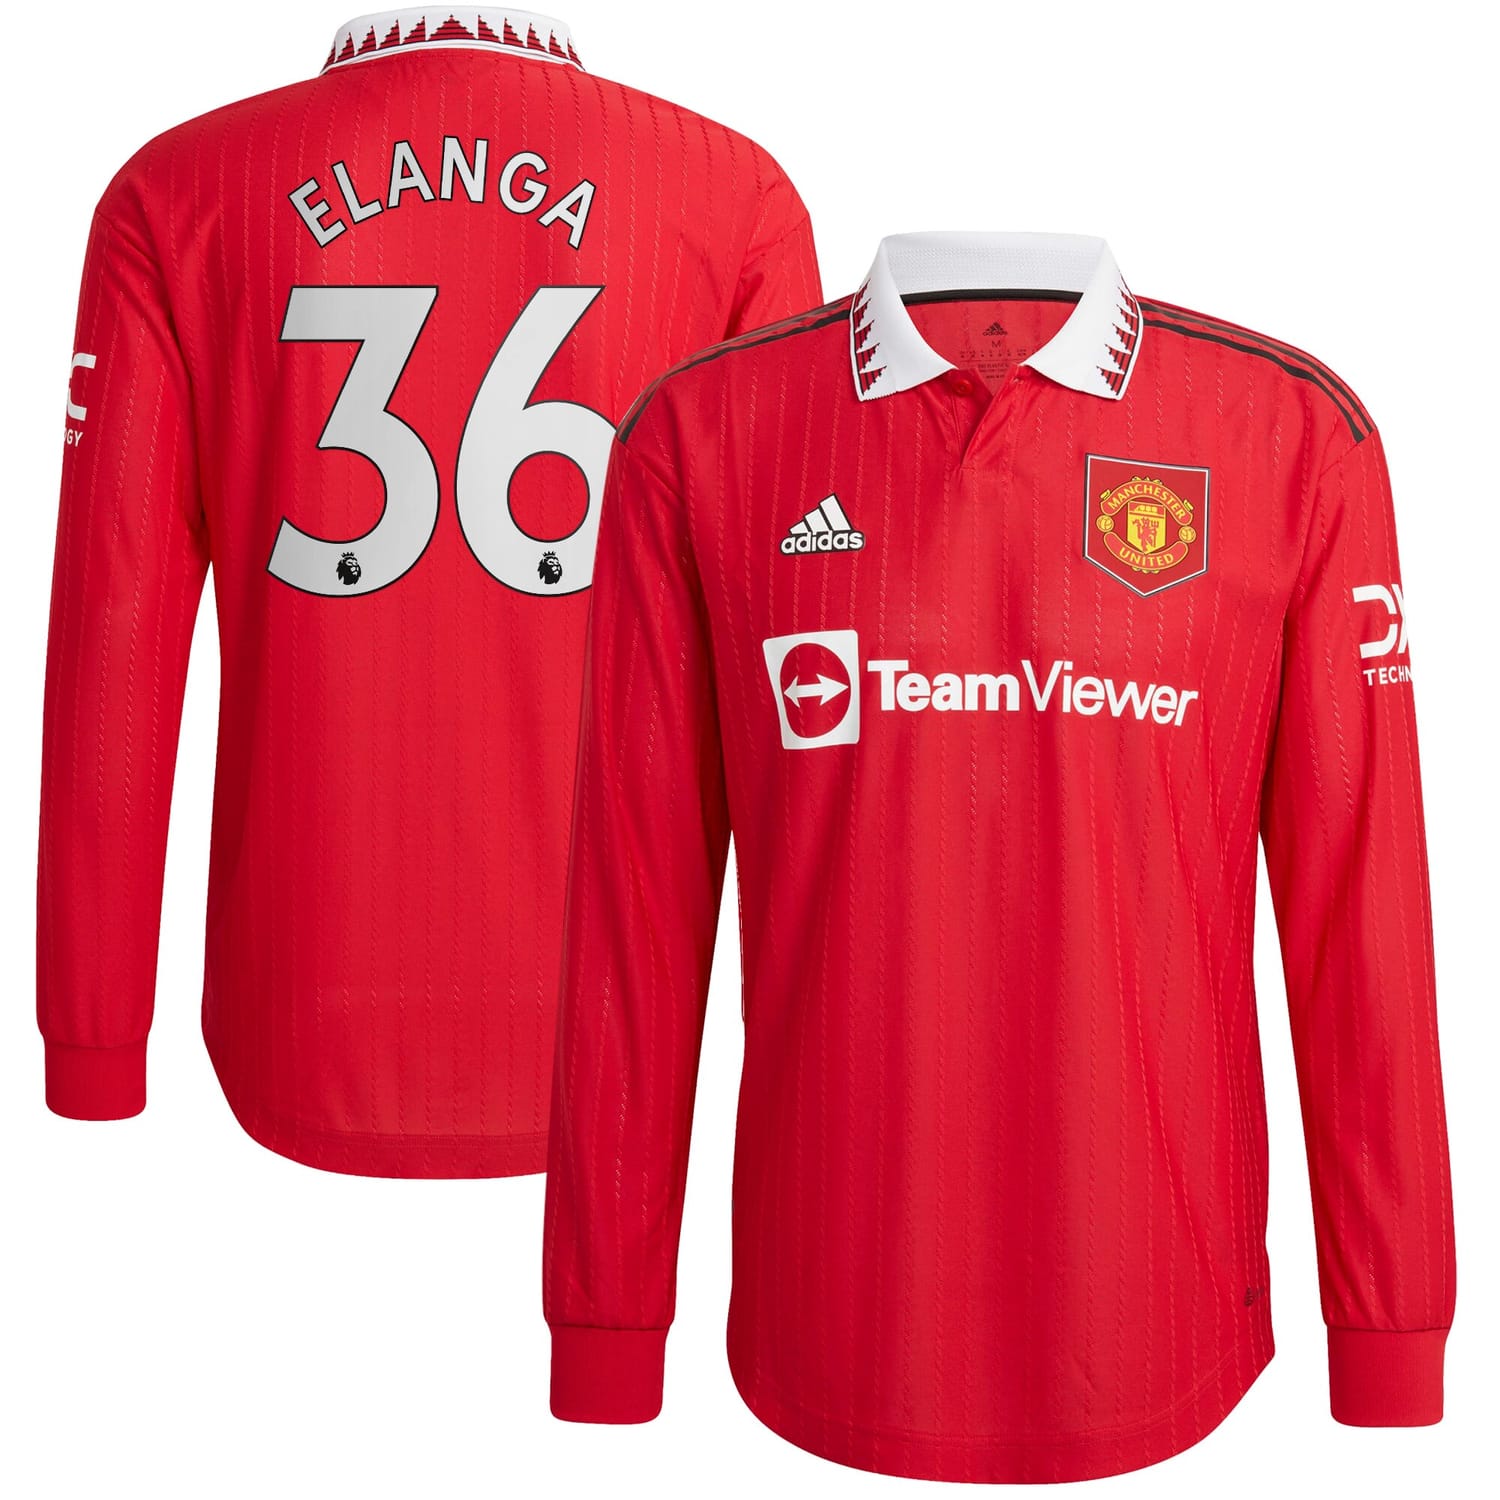 Premier League Manchester United Home Authentic Jersey Shirt Long Sleeve 2022-23 player Anthony Elanga 36 printing for Men